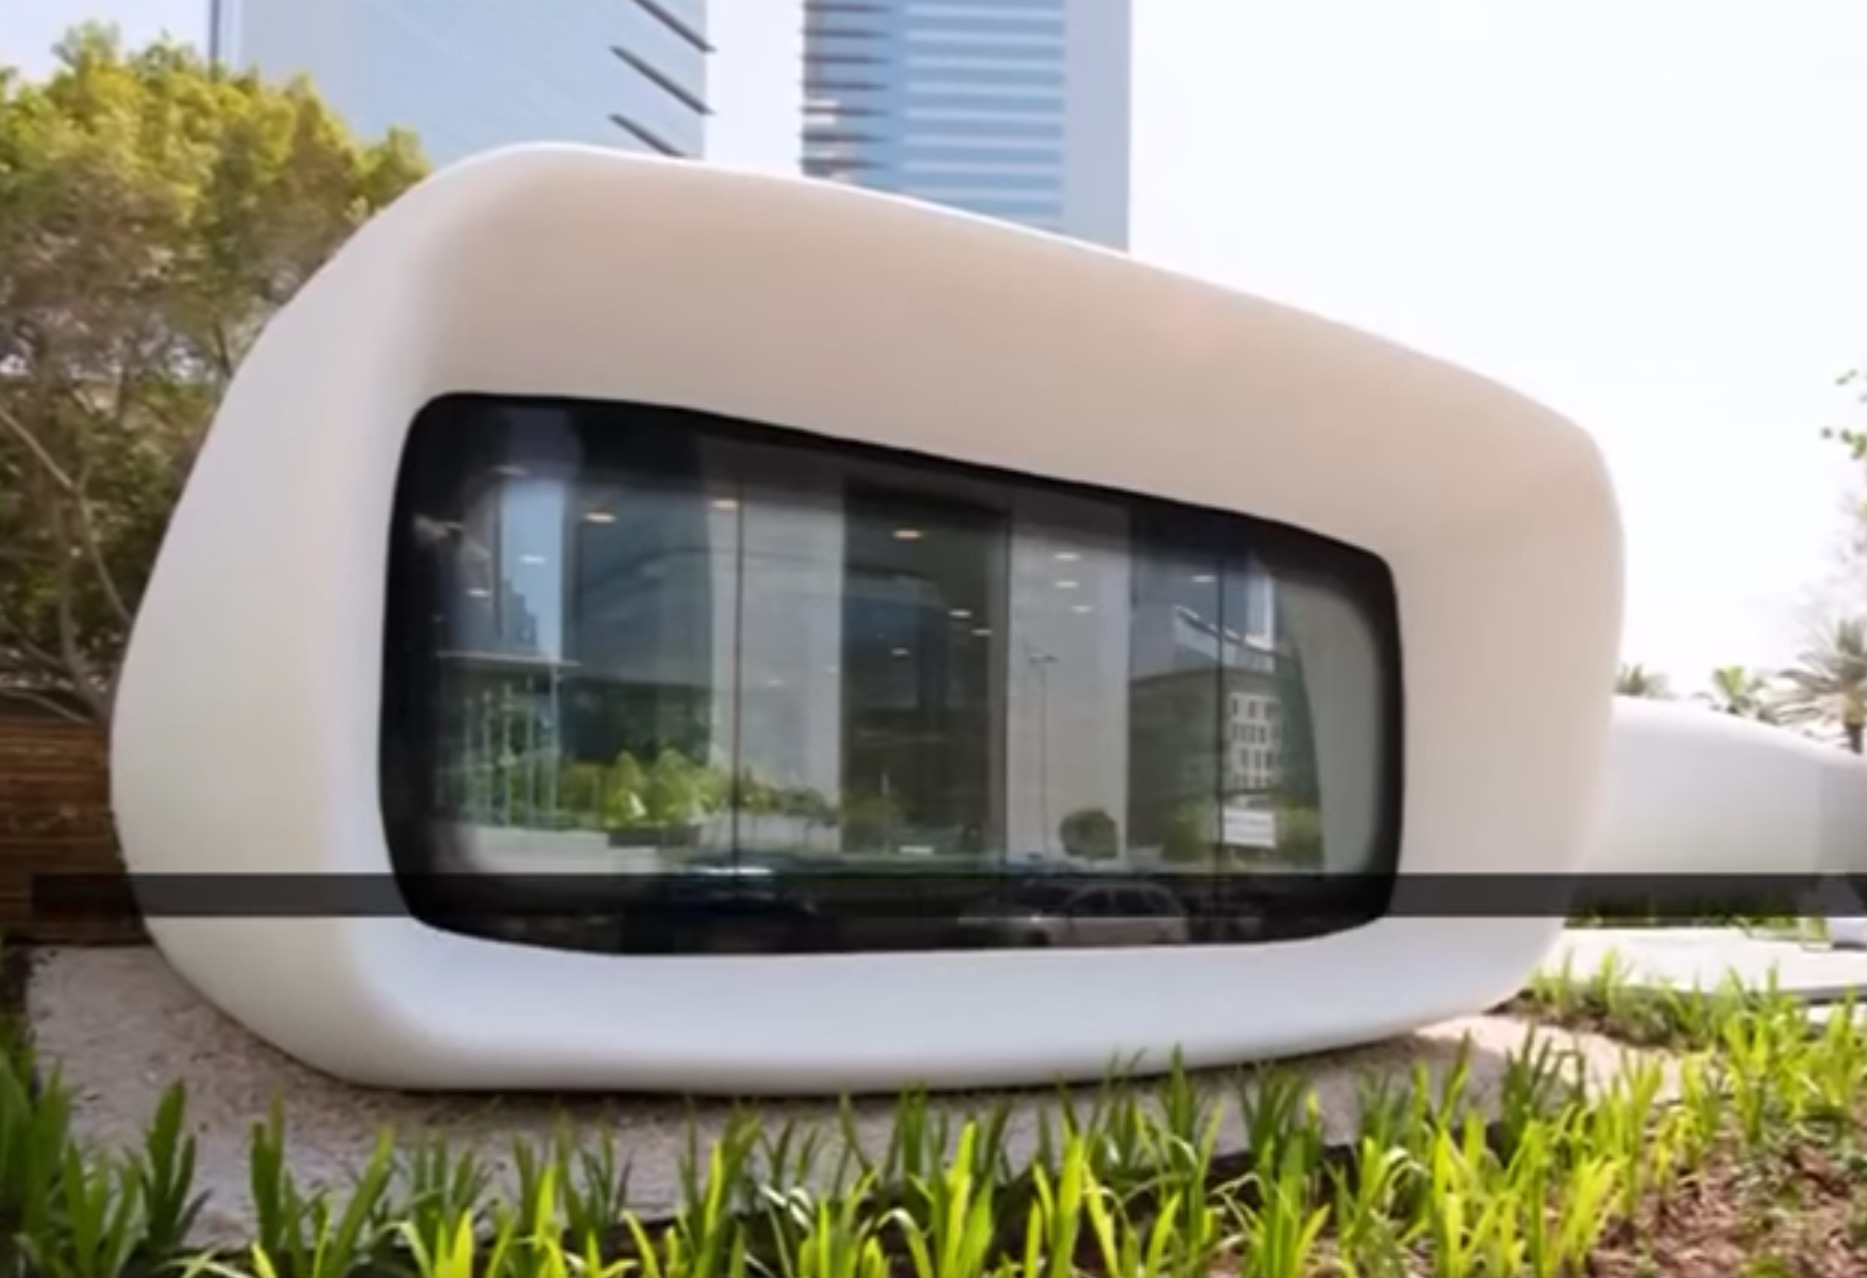  A prototype 3D printed office in Dubai 